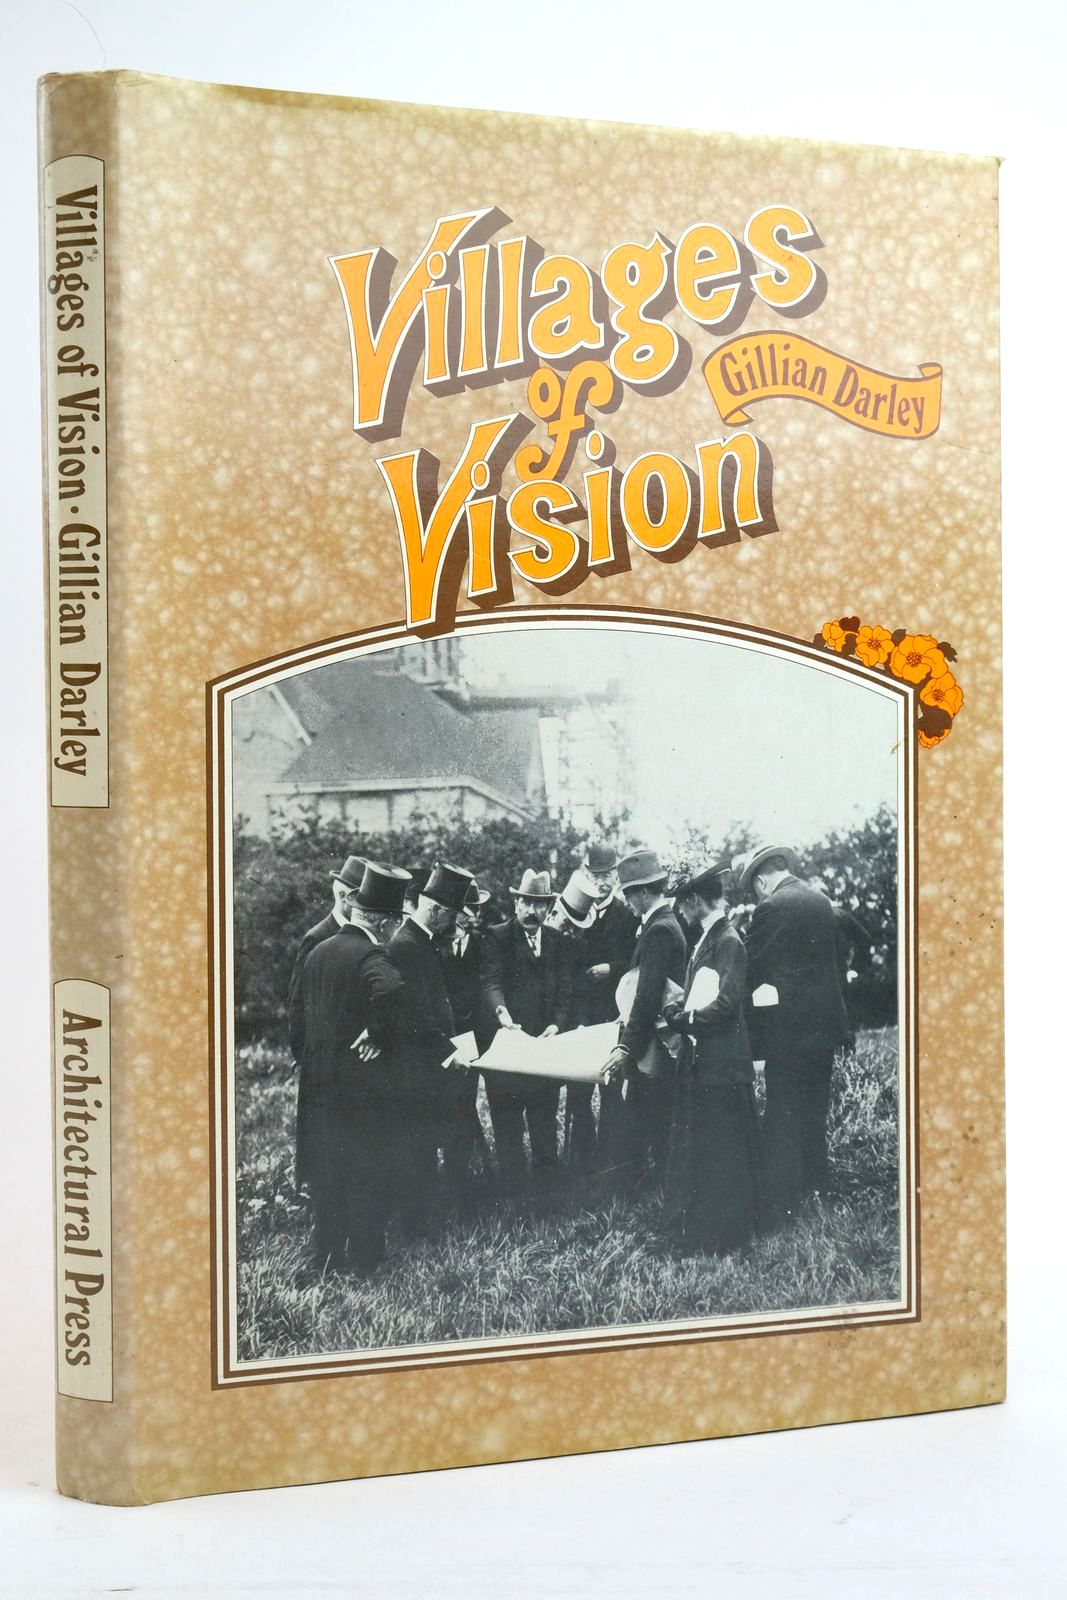 Photo of VILLAGES OF VISION written by Darley, Gillian published by The Architectural Press (STOCK CODE: 2136074)  for sale by Stella & Rose's Books